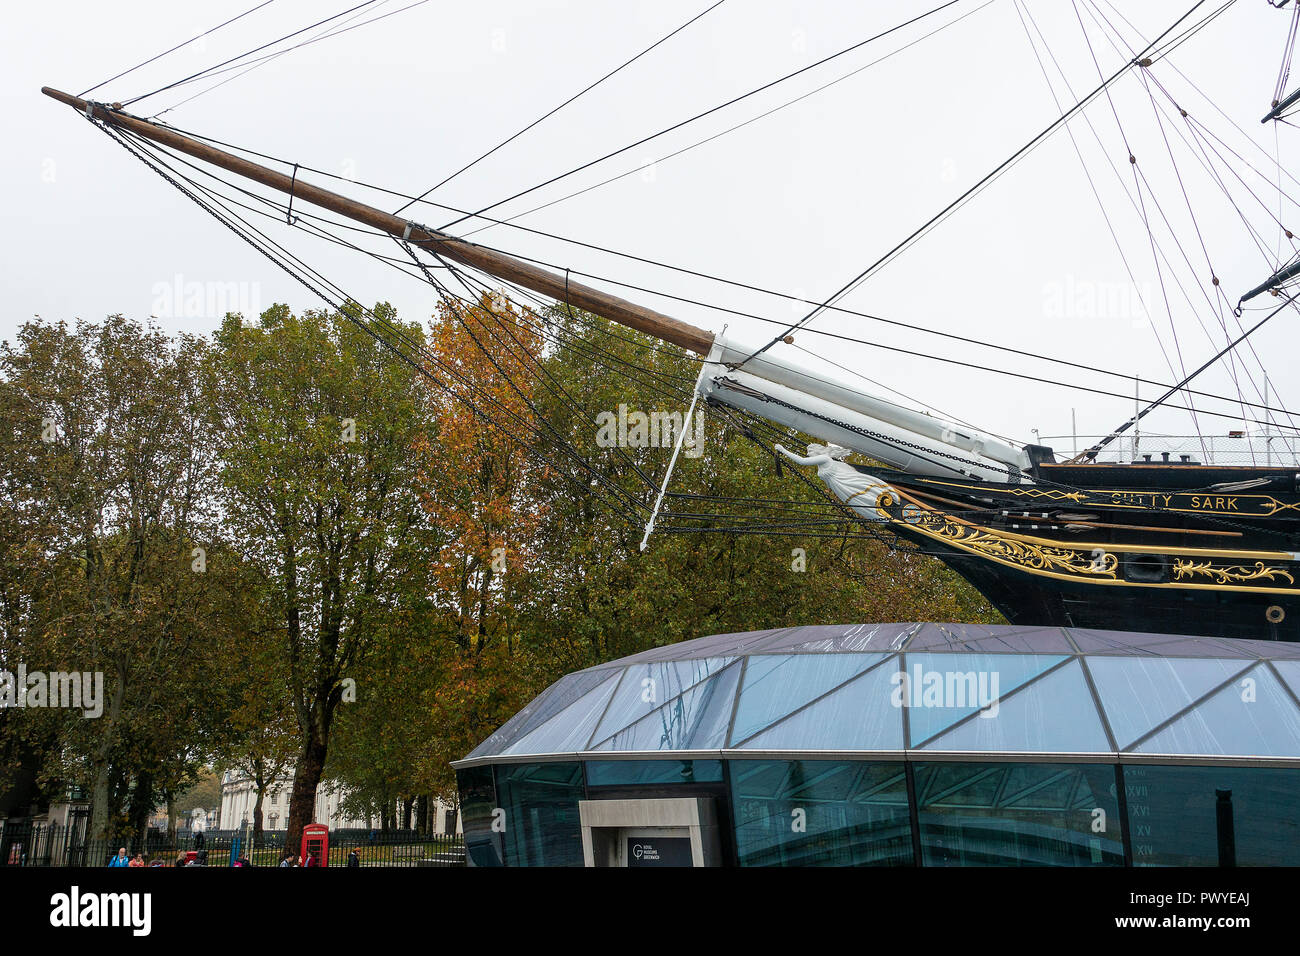 The Cutty Sark Tea Clipper Sailing Ship Open to the Public as a Museum Piece at Greenwich on the River Thames London England United Kingdom UK Stock Photo